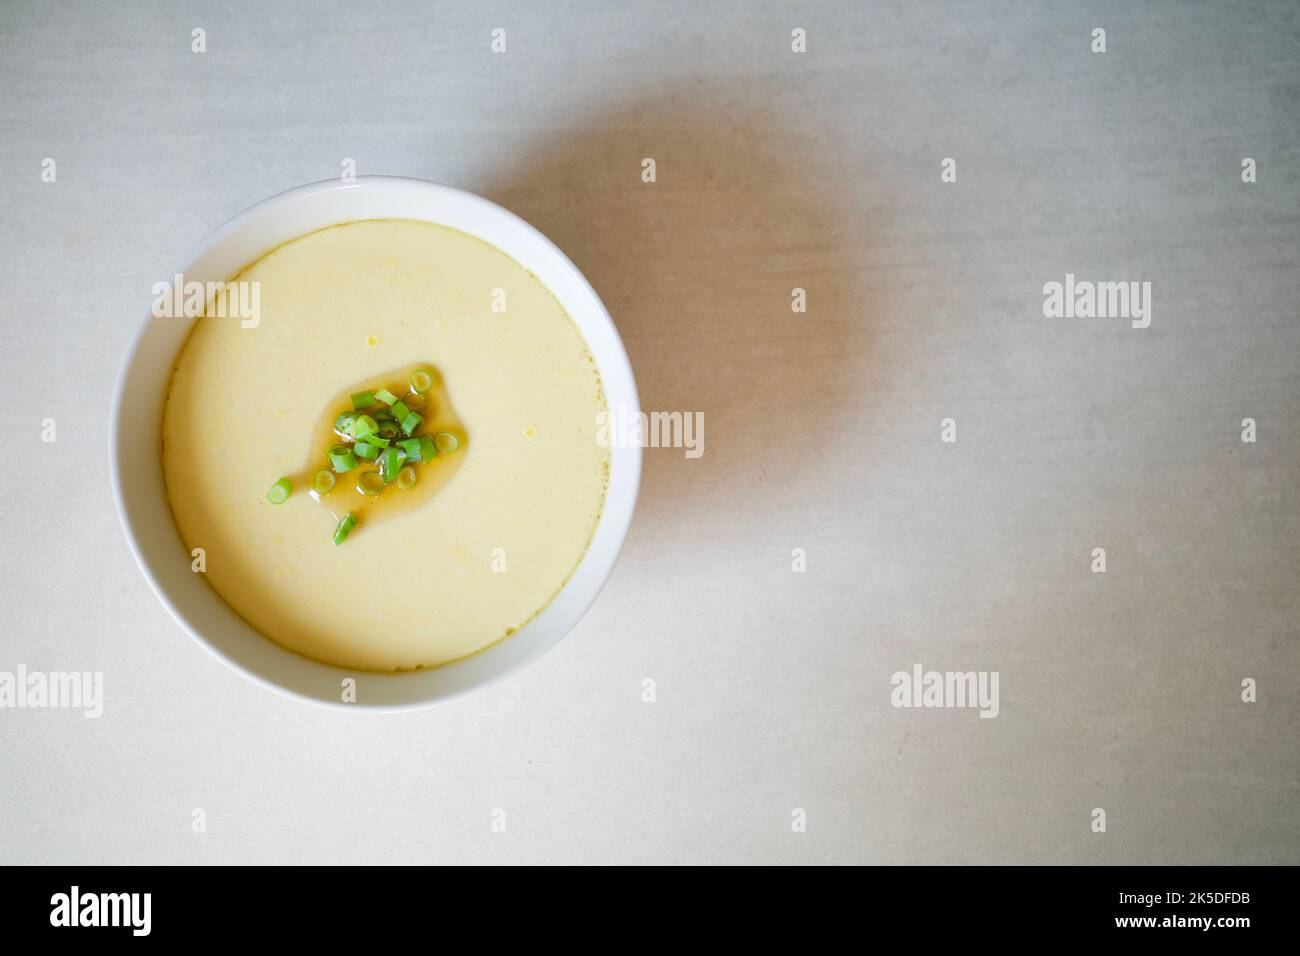 Steamed eggs. It’s a common homemade cuisine in many Asian countries like China, Taiwan, and Japan. Stock Photo